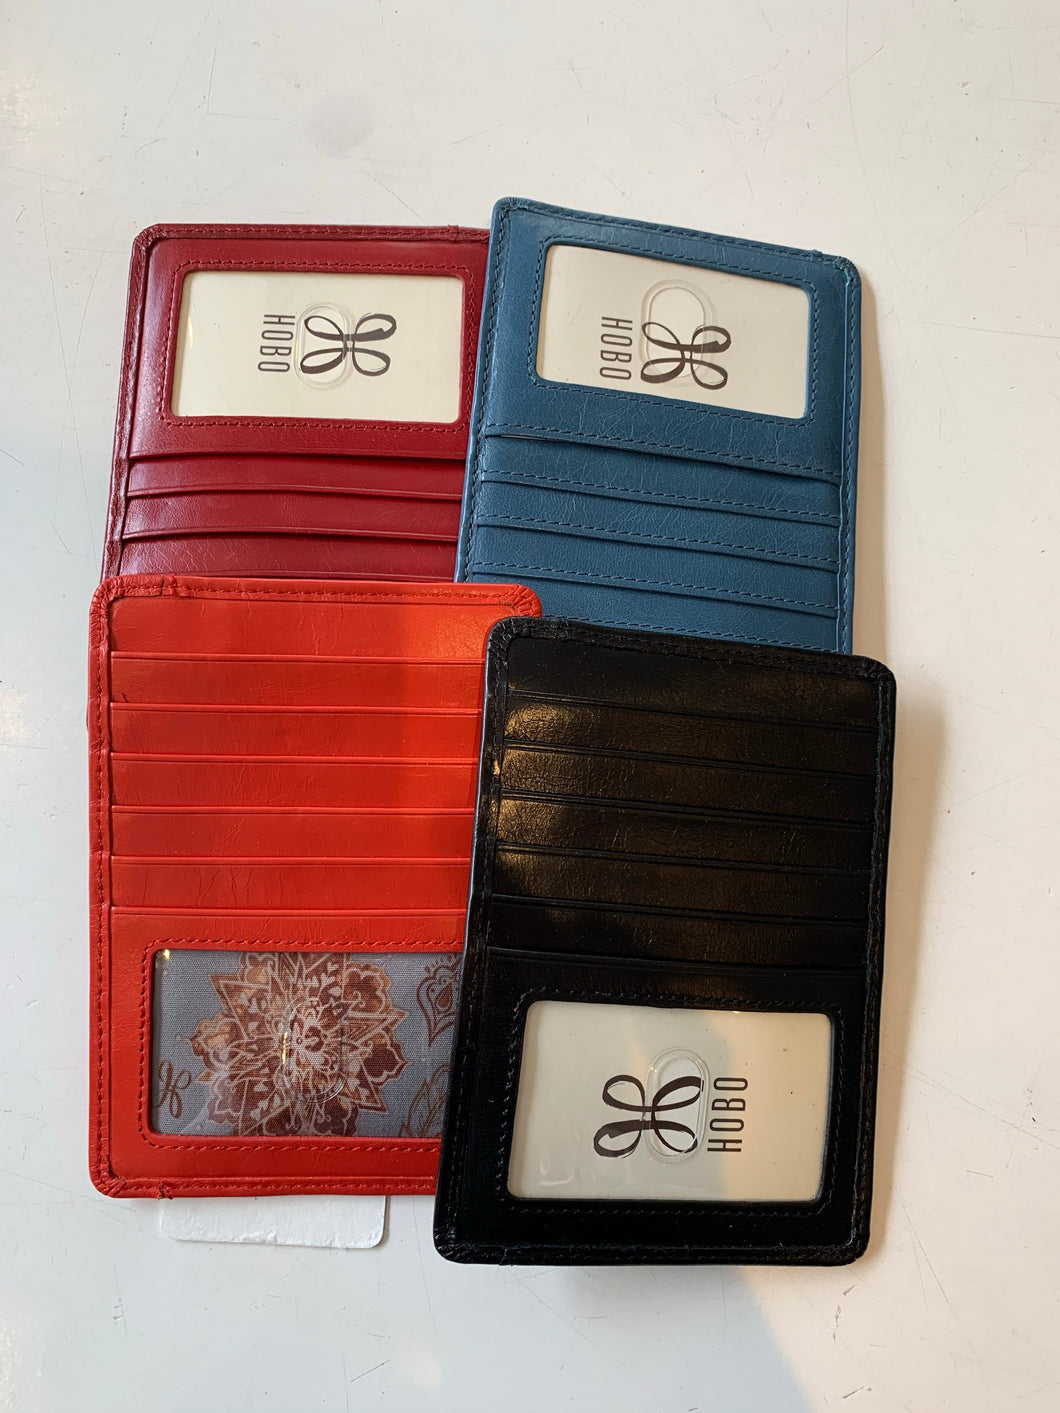 Euro Slide Credit Card and Passport Case by Hobo Handbags